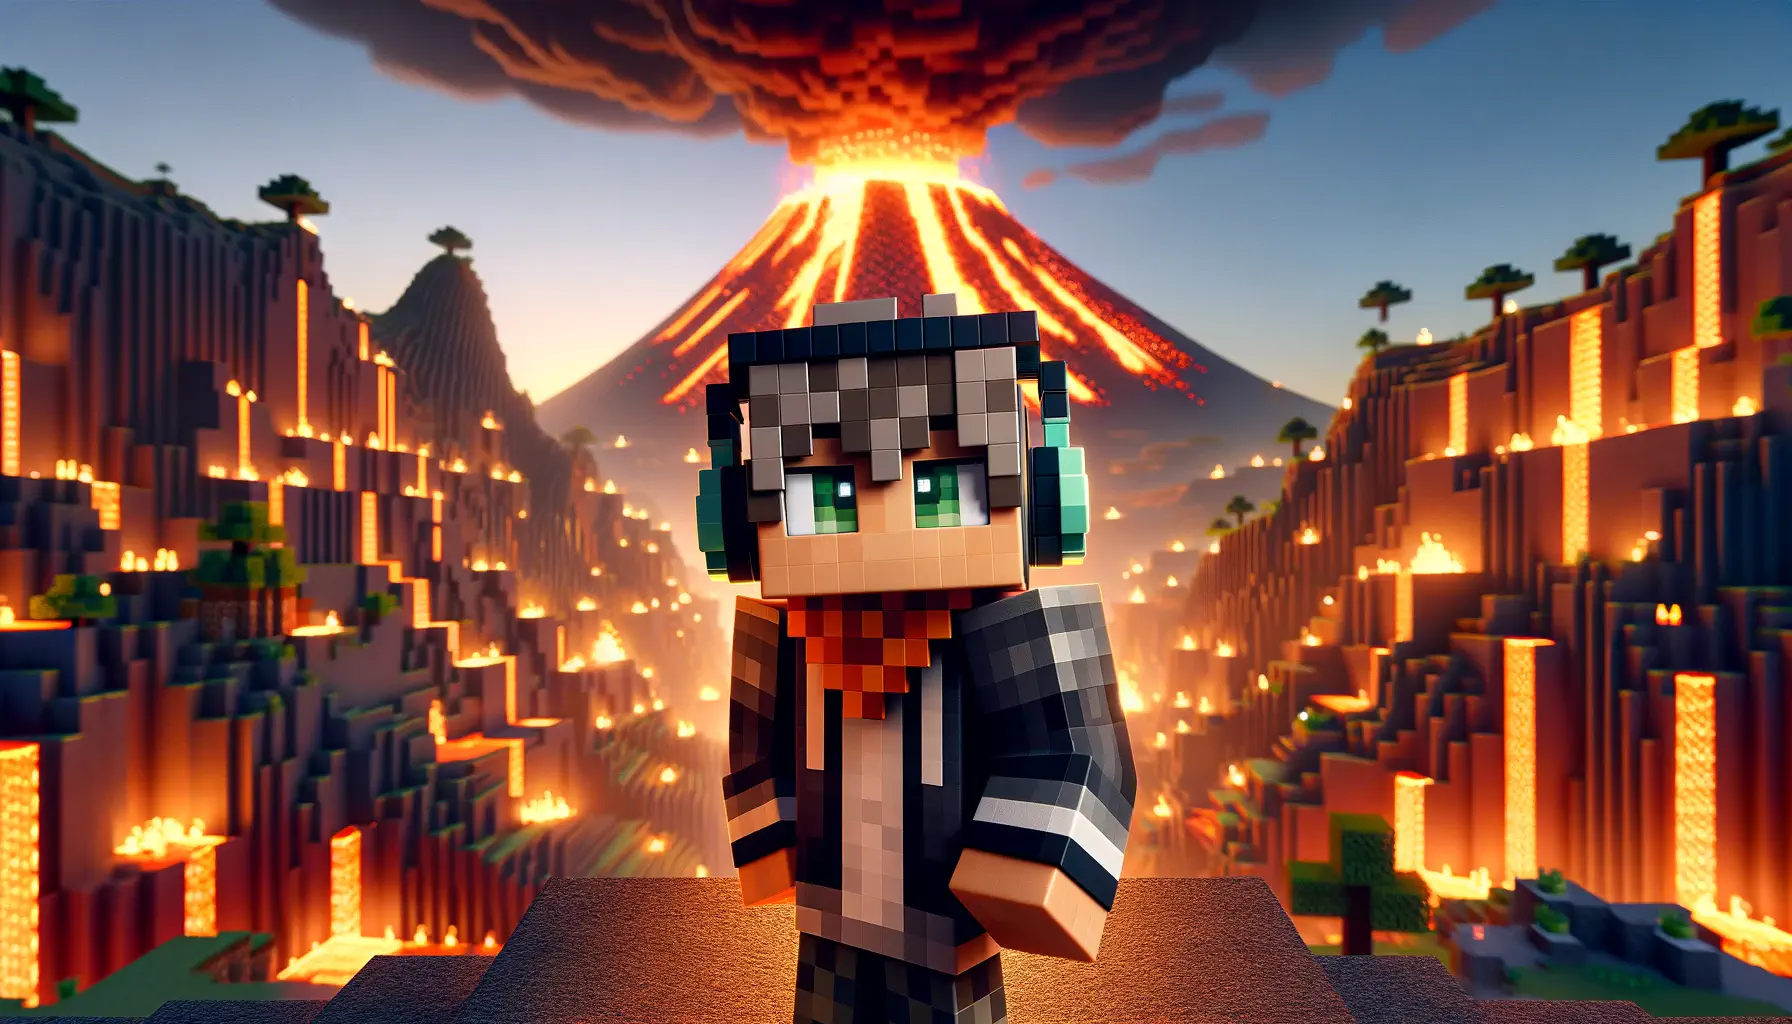 A Minecraft character wearing headphones, striding towards the viewer with an erupting volcano in the background.